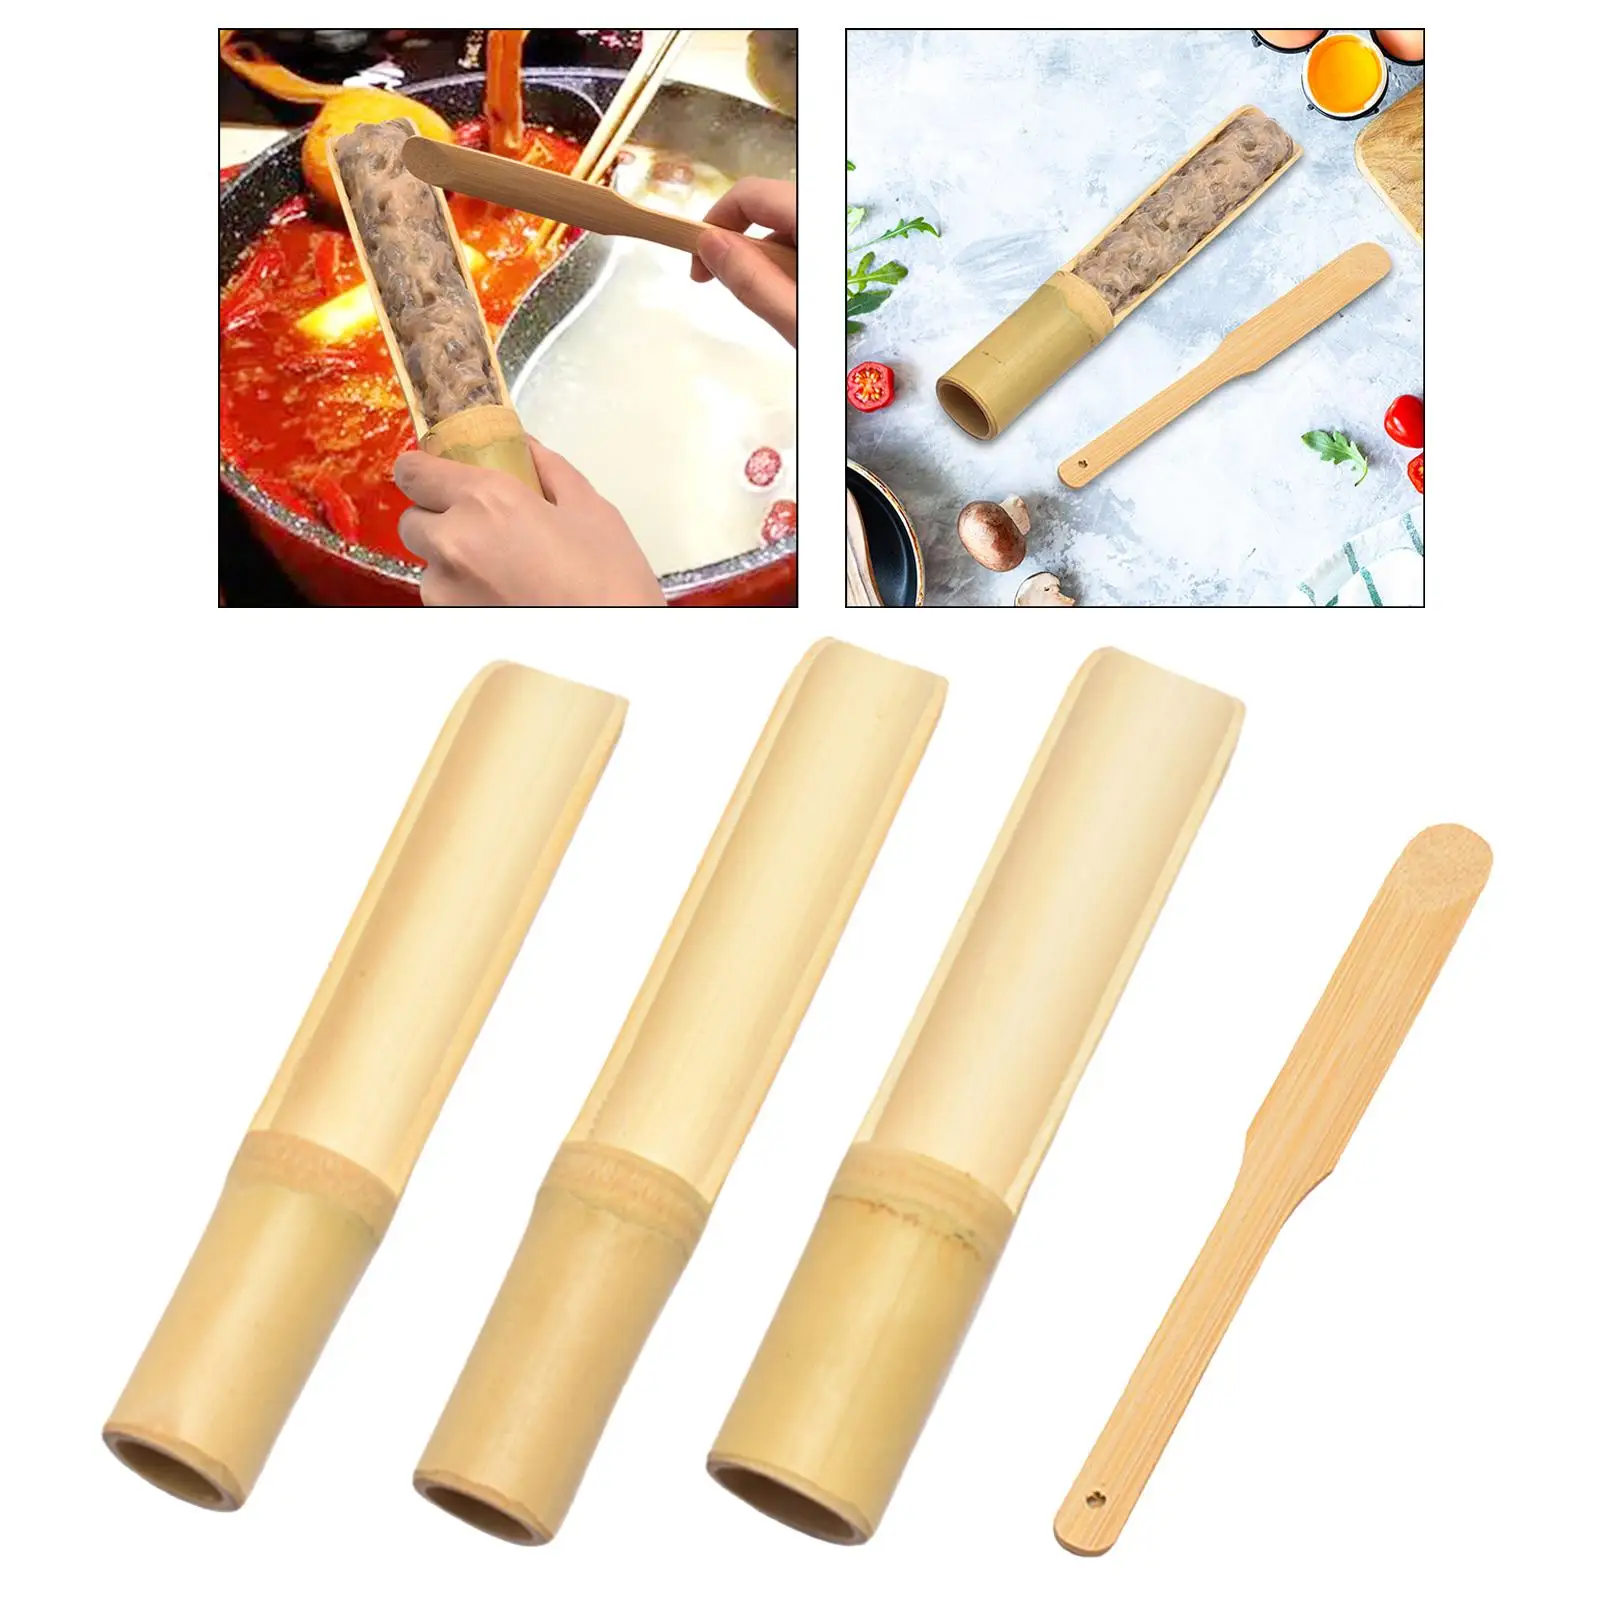 Bamboo Meat Ball Maker Accs Convenient Multipurpose Spoon Utensils Gadgets for Home